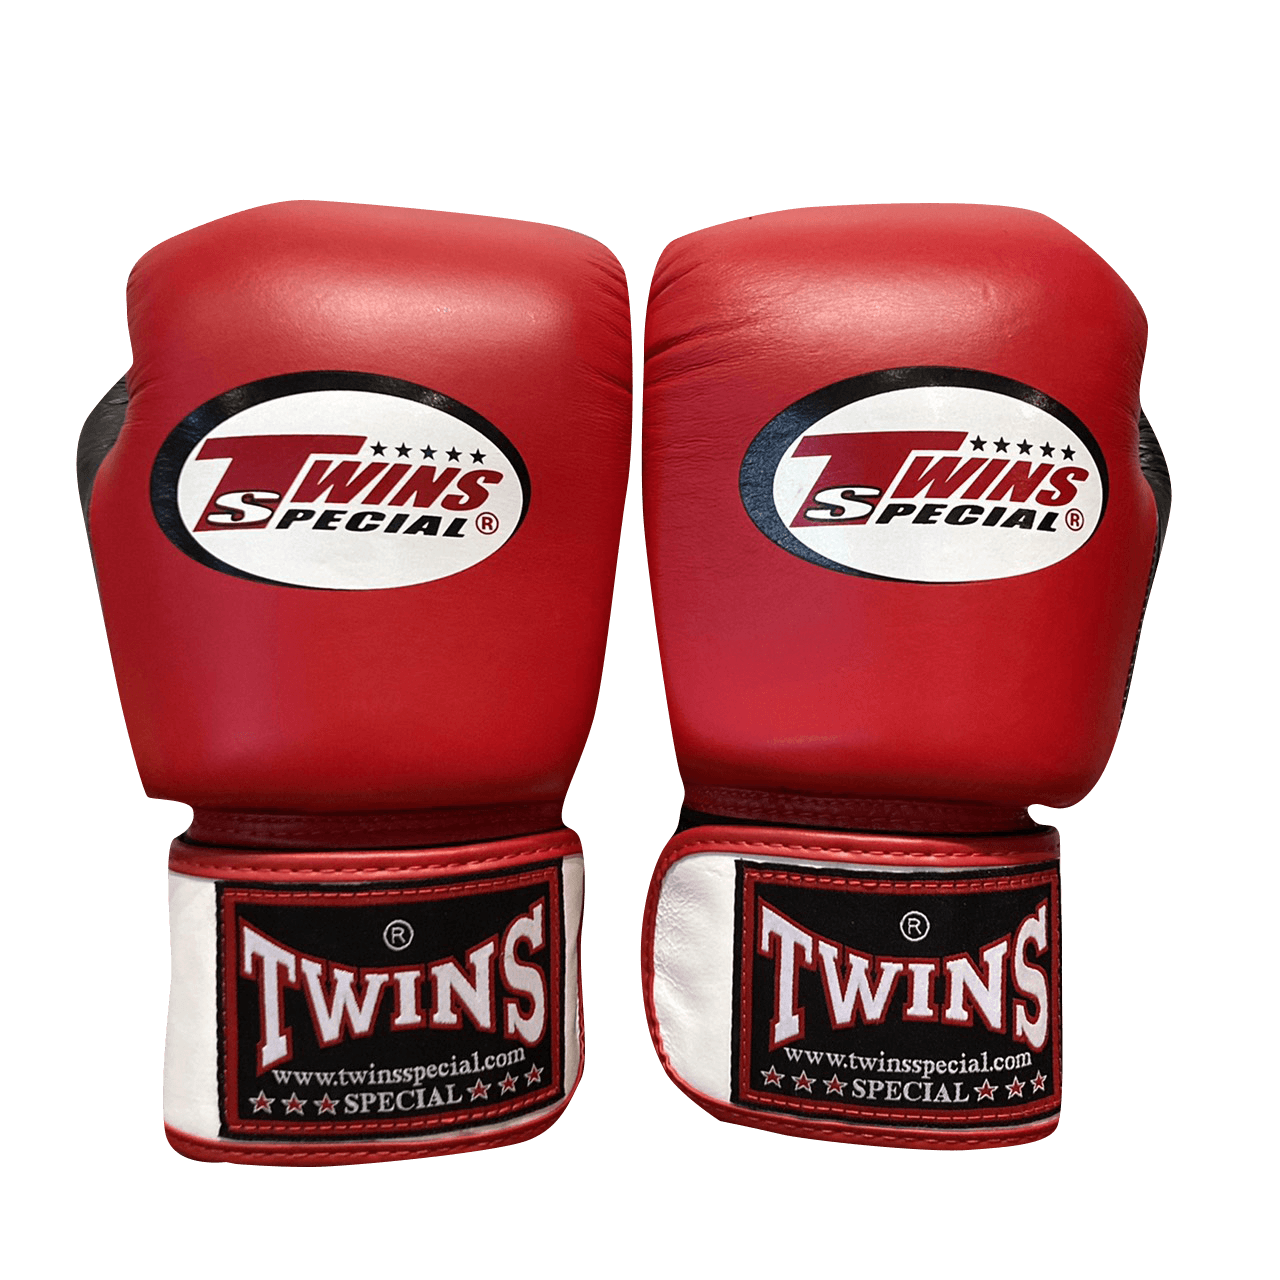 Twins Special Boxing Gloves BGVLA-3T Wh/Rd/Bk/Bk Red Front Twins Special